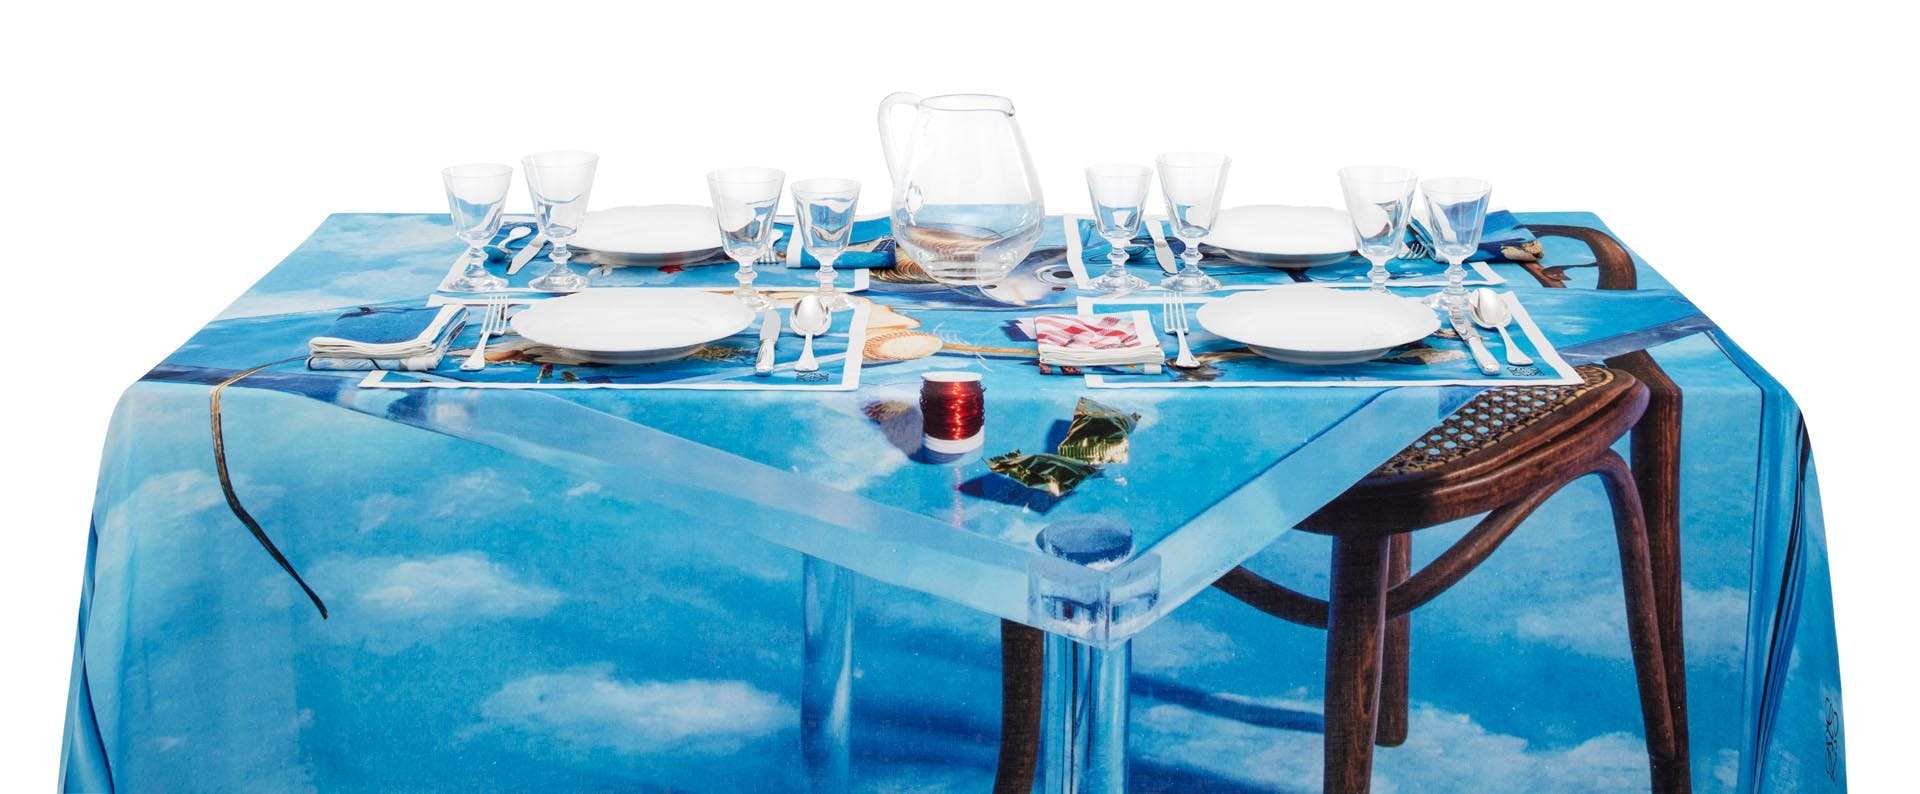 furniture table dining table glass goblet